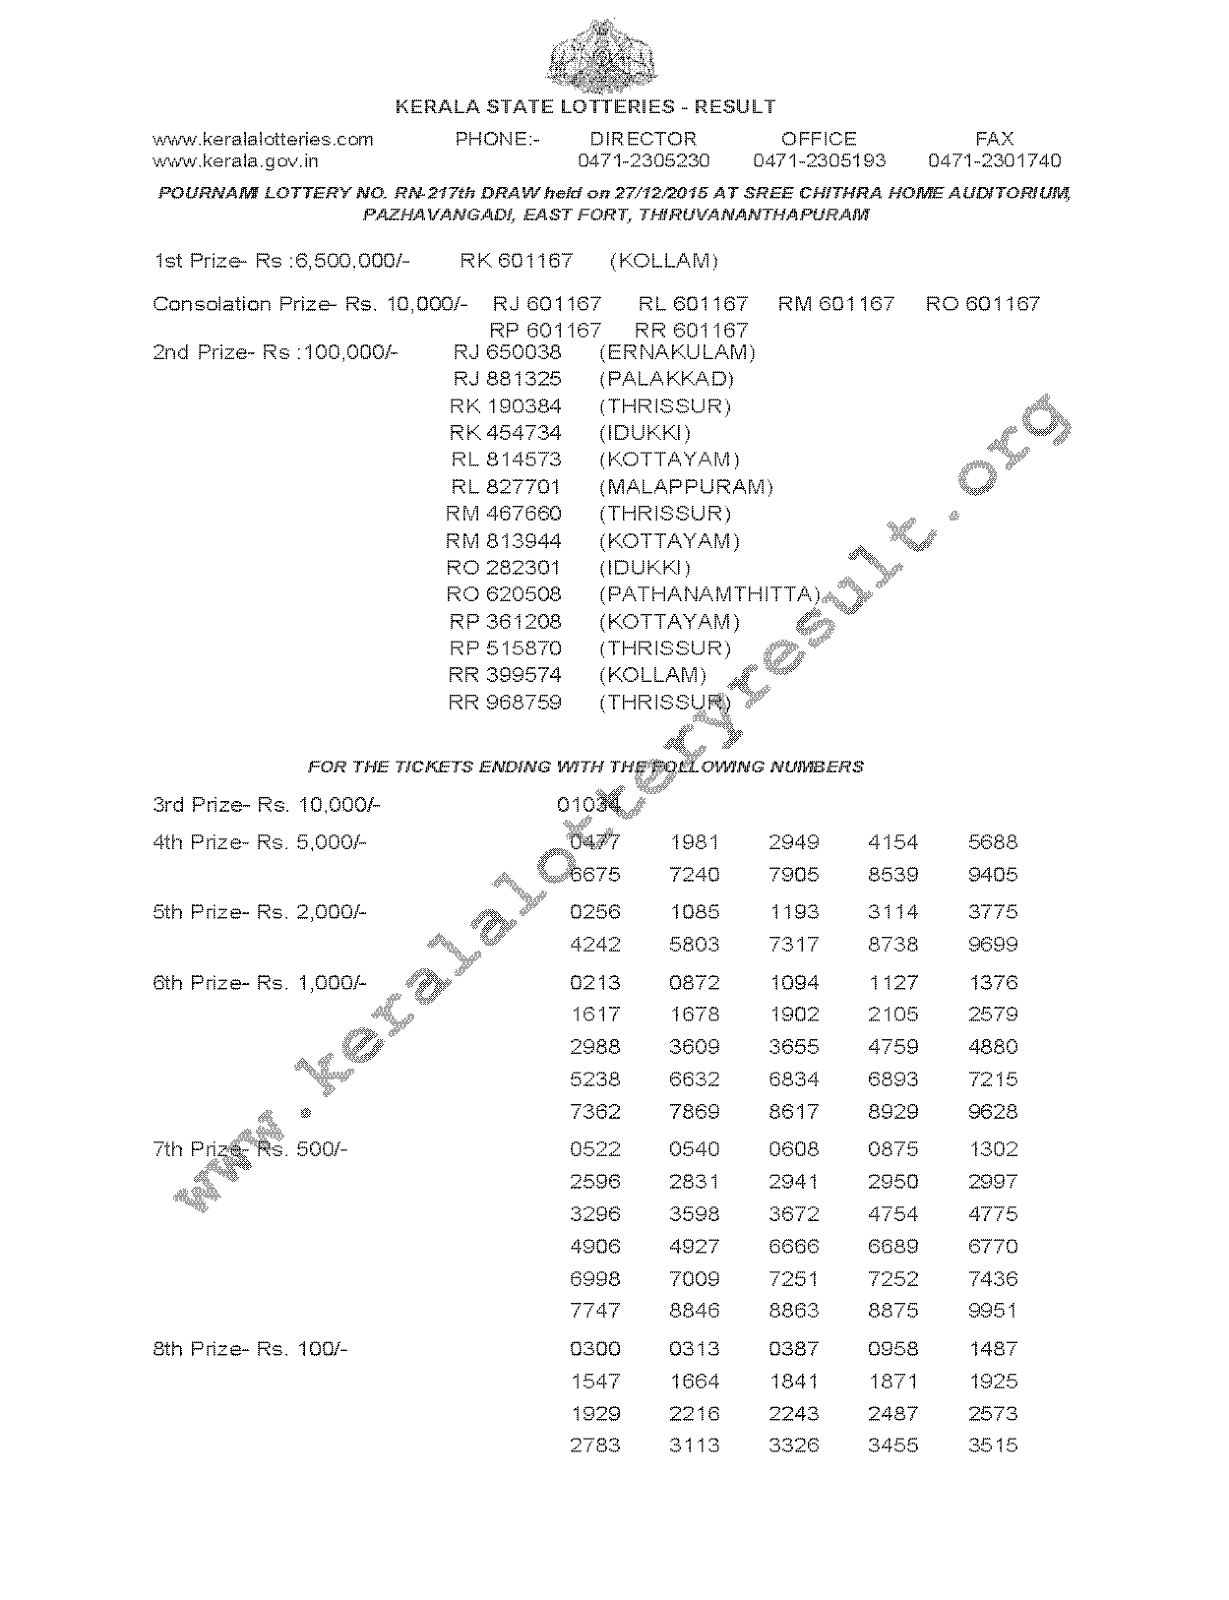 POURNAMI Lottery RN 217 Result 27-12-2015